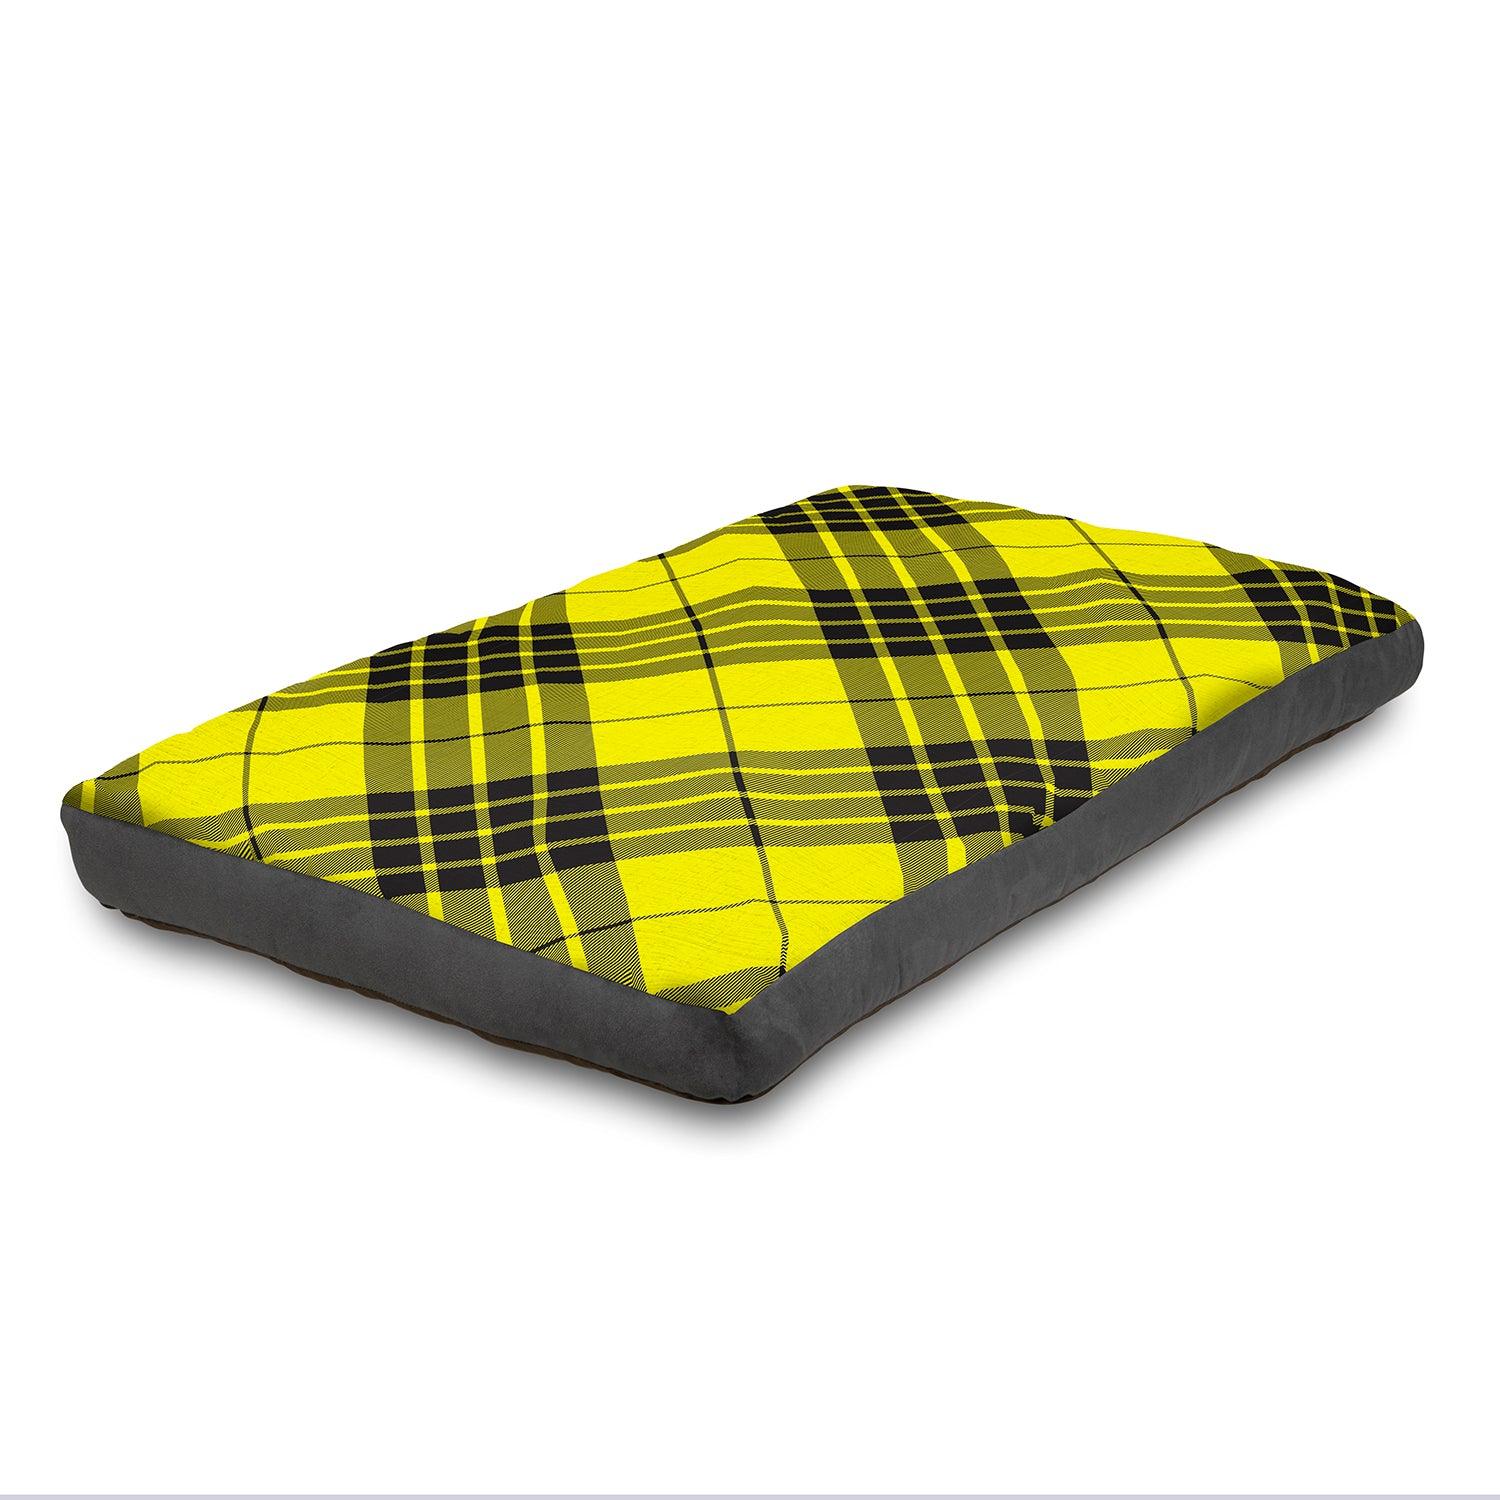 View Super Comfy Dog Bed Soft and Fluffy with Washable Cover Small 75 x 50 cm Yellow information